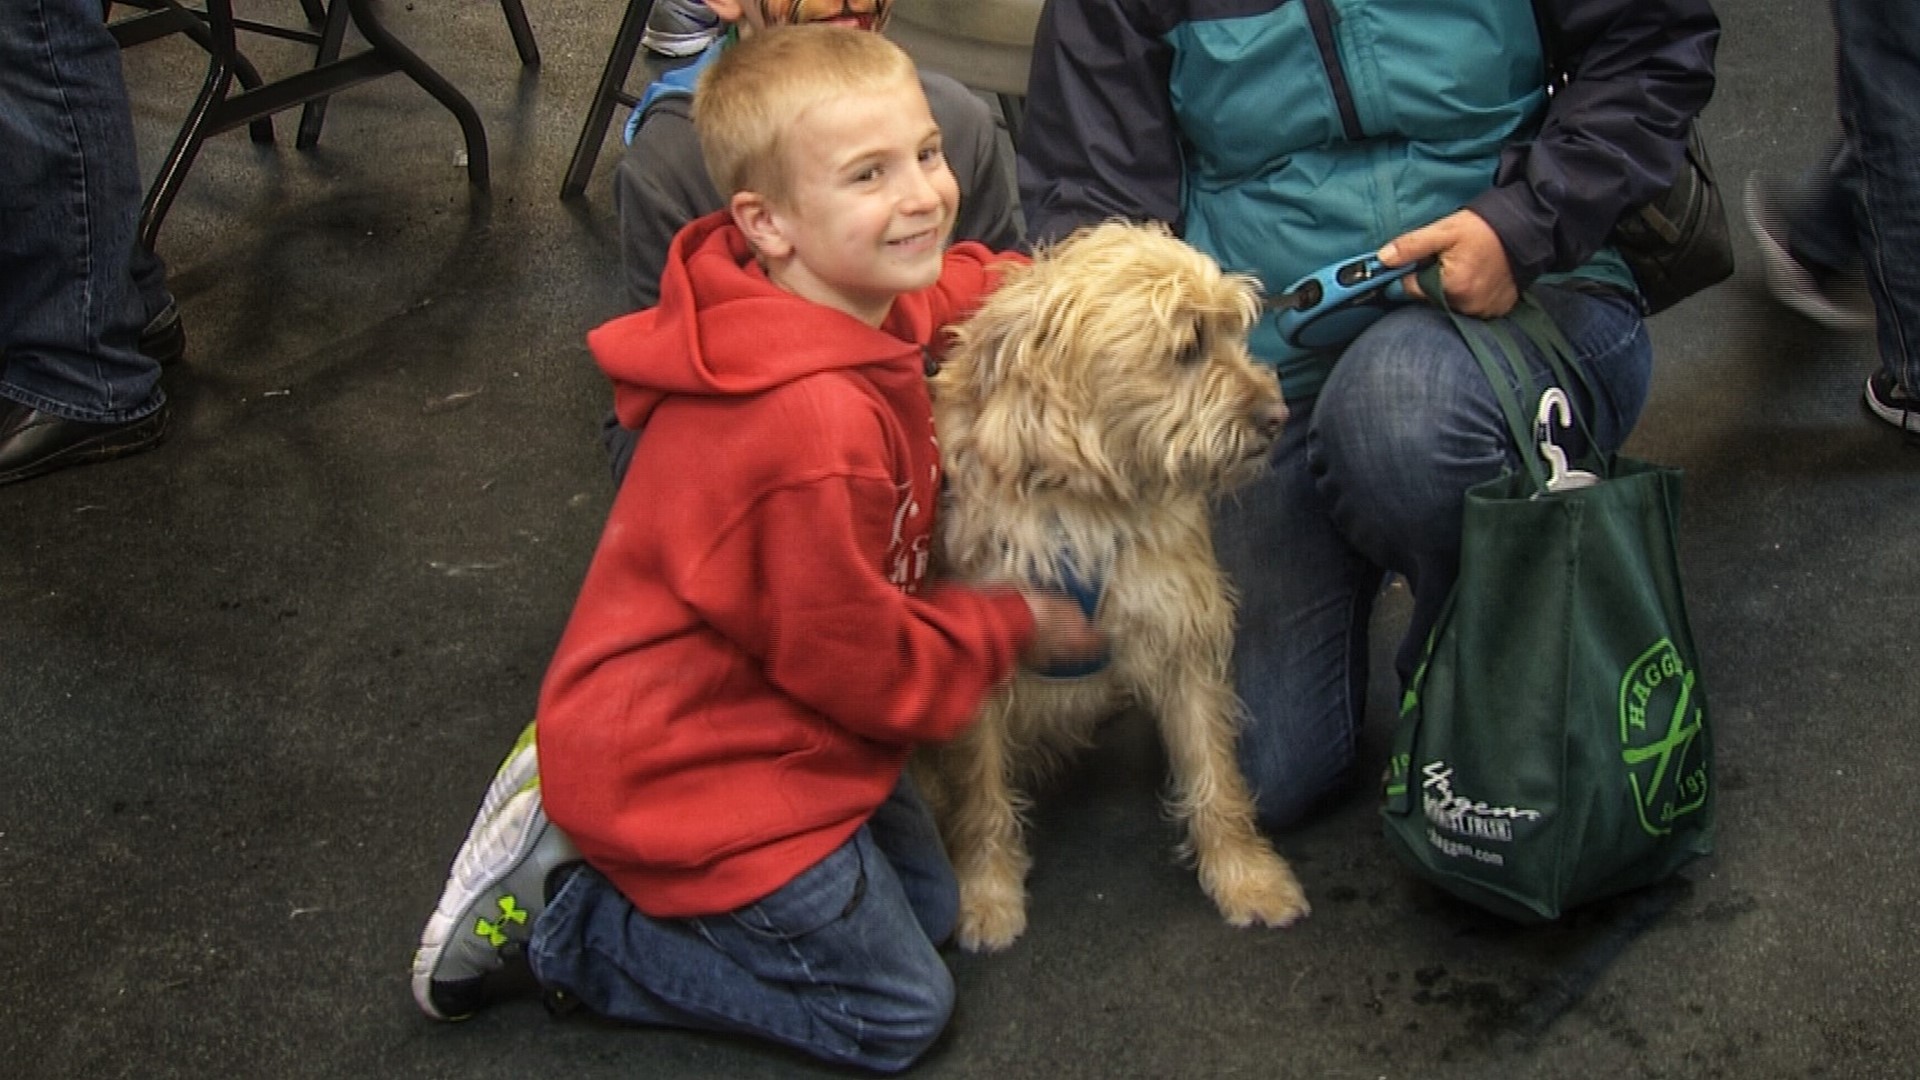 He started saving dogs when he was only 4 years old. 12 Under 12 is sponsored by Kaiser Permanente.